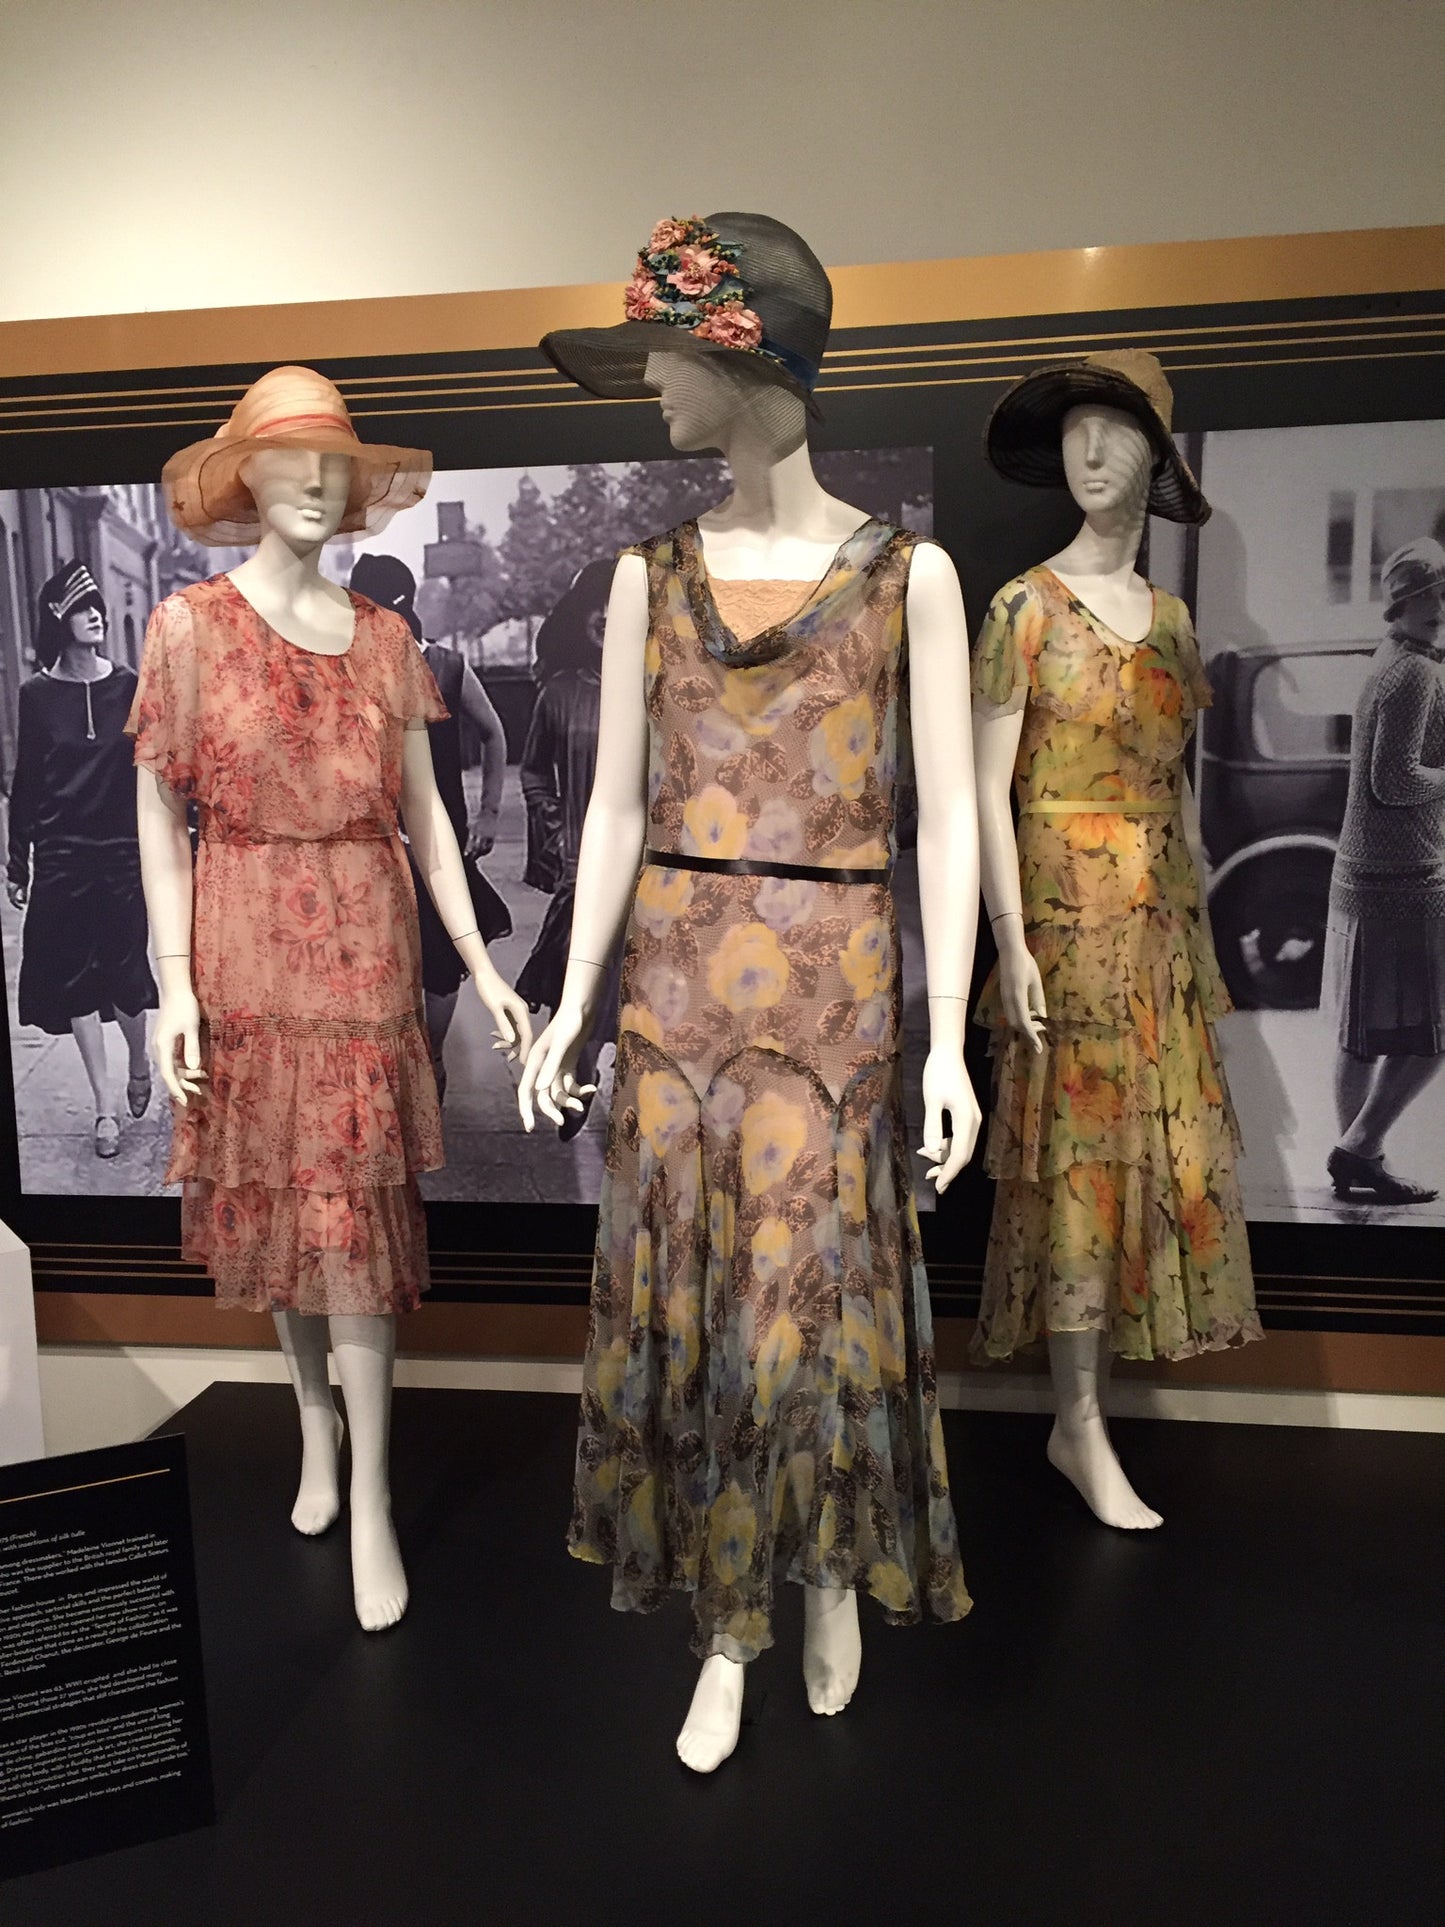 Decadence: Fashion From The 1920's